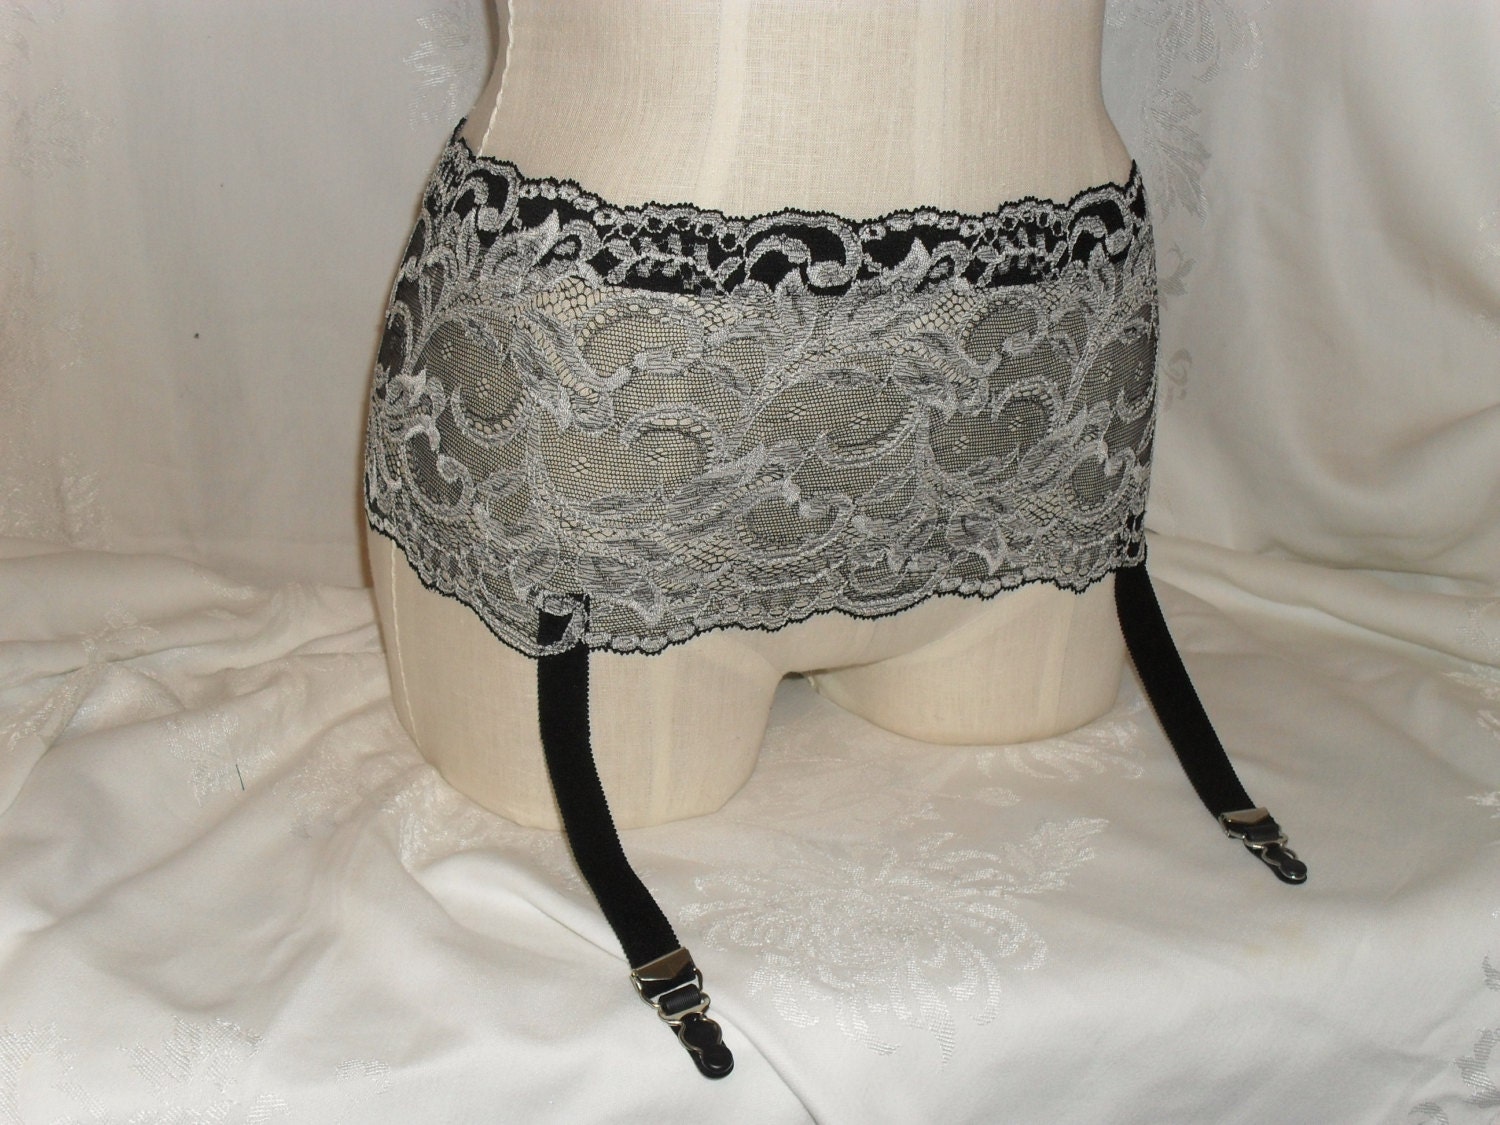 Black and White Sheer Stretch Lace Garter Belt